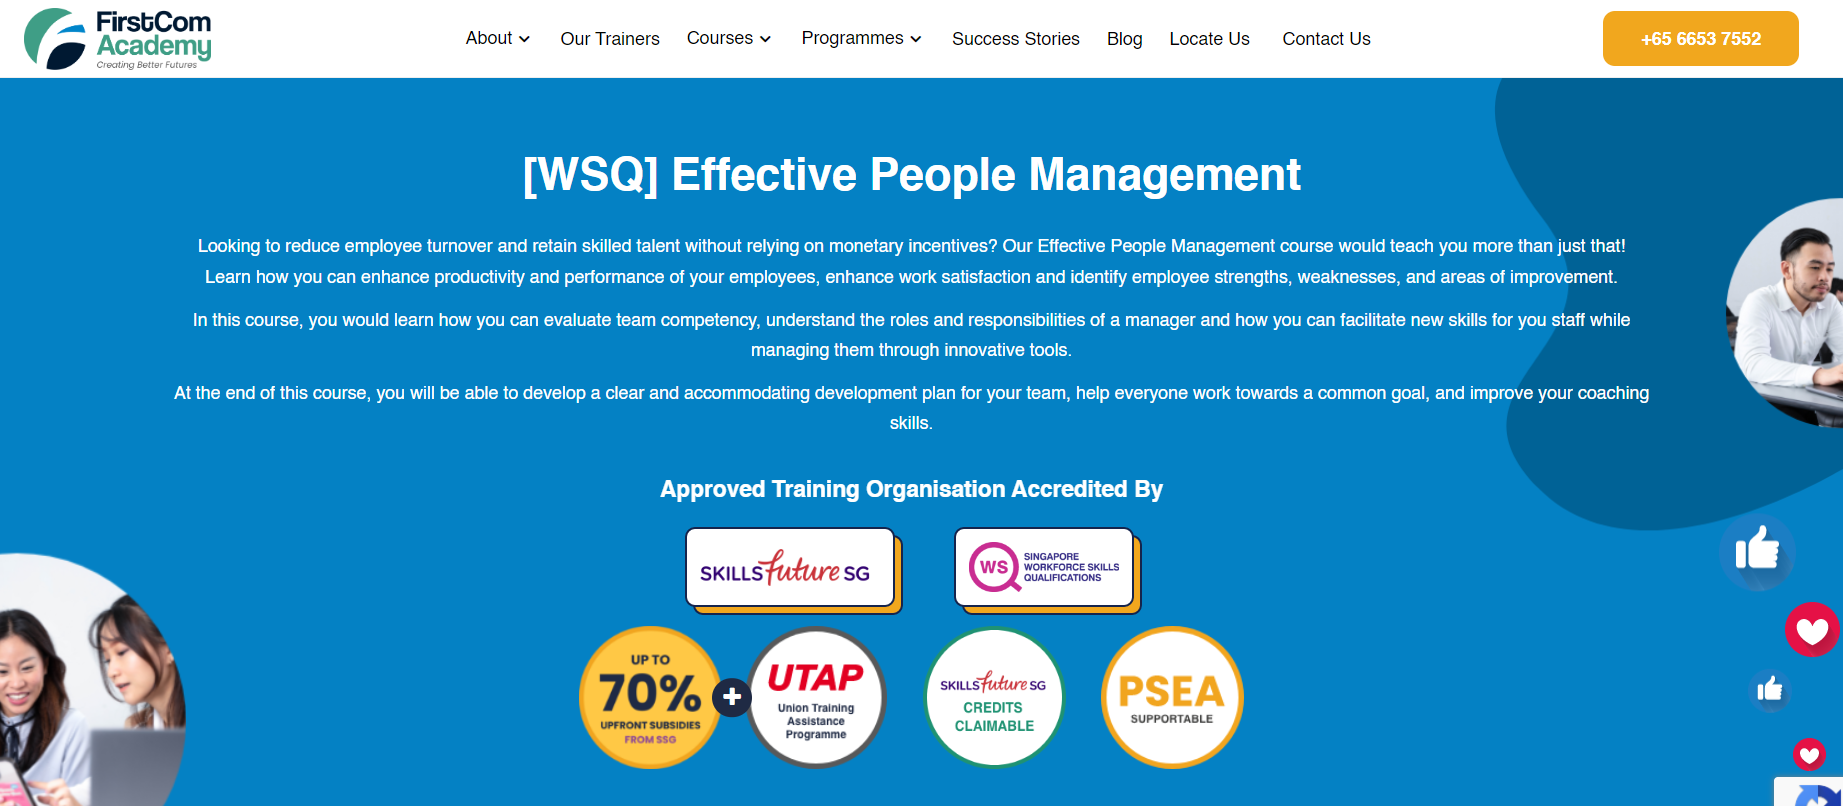 FirstCom Academy: Effective People Management course